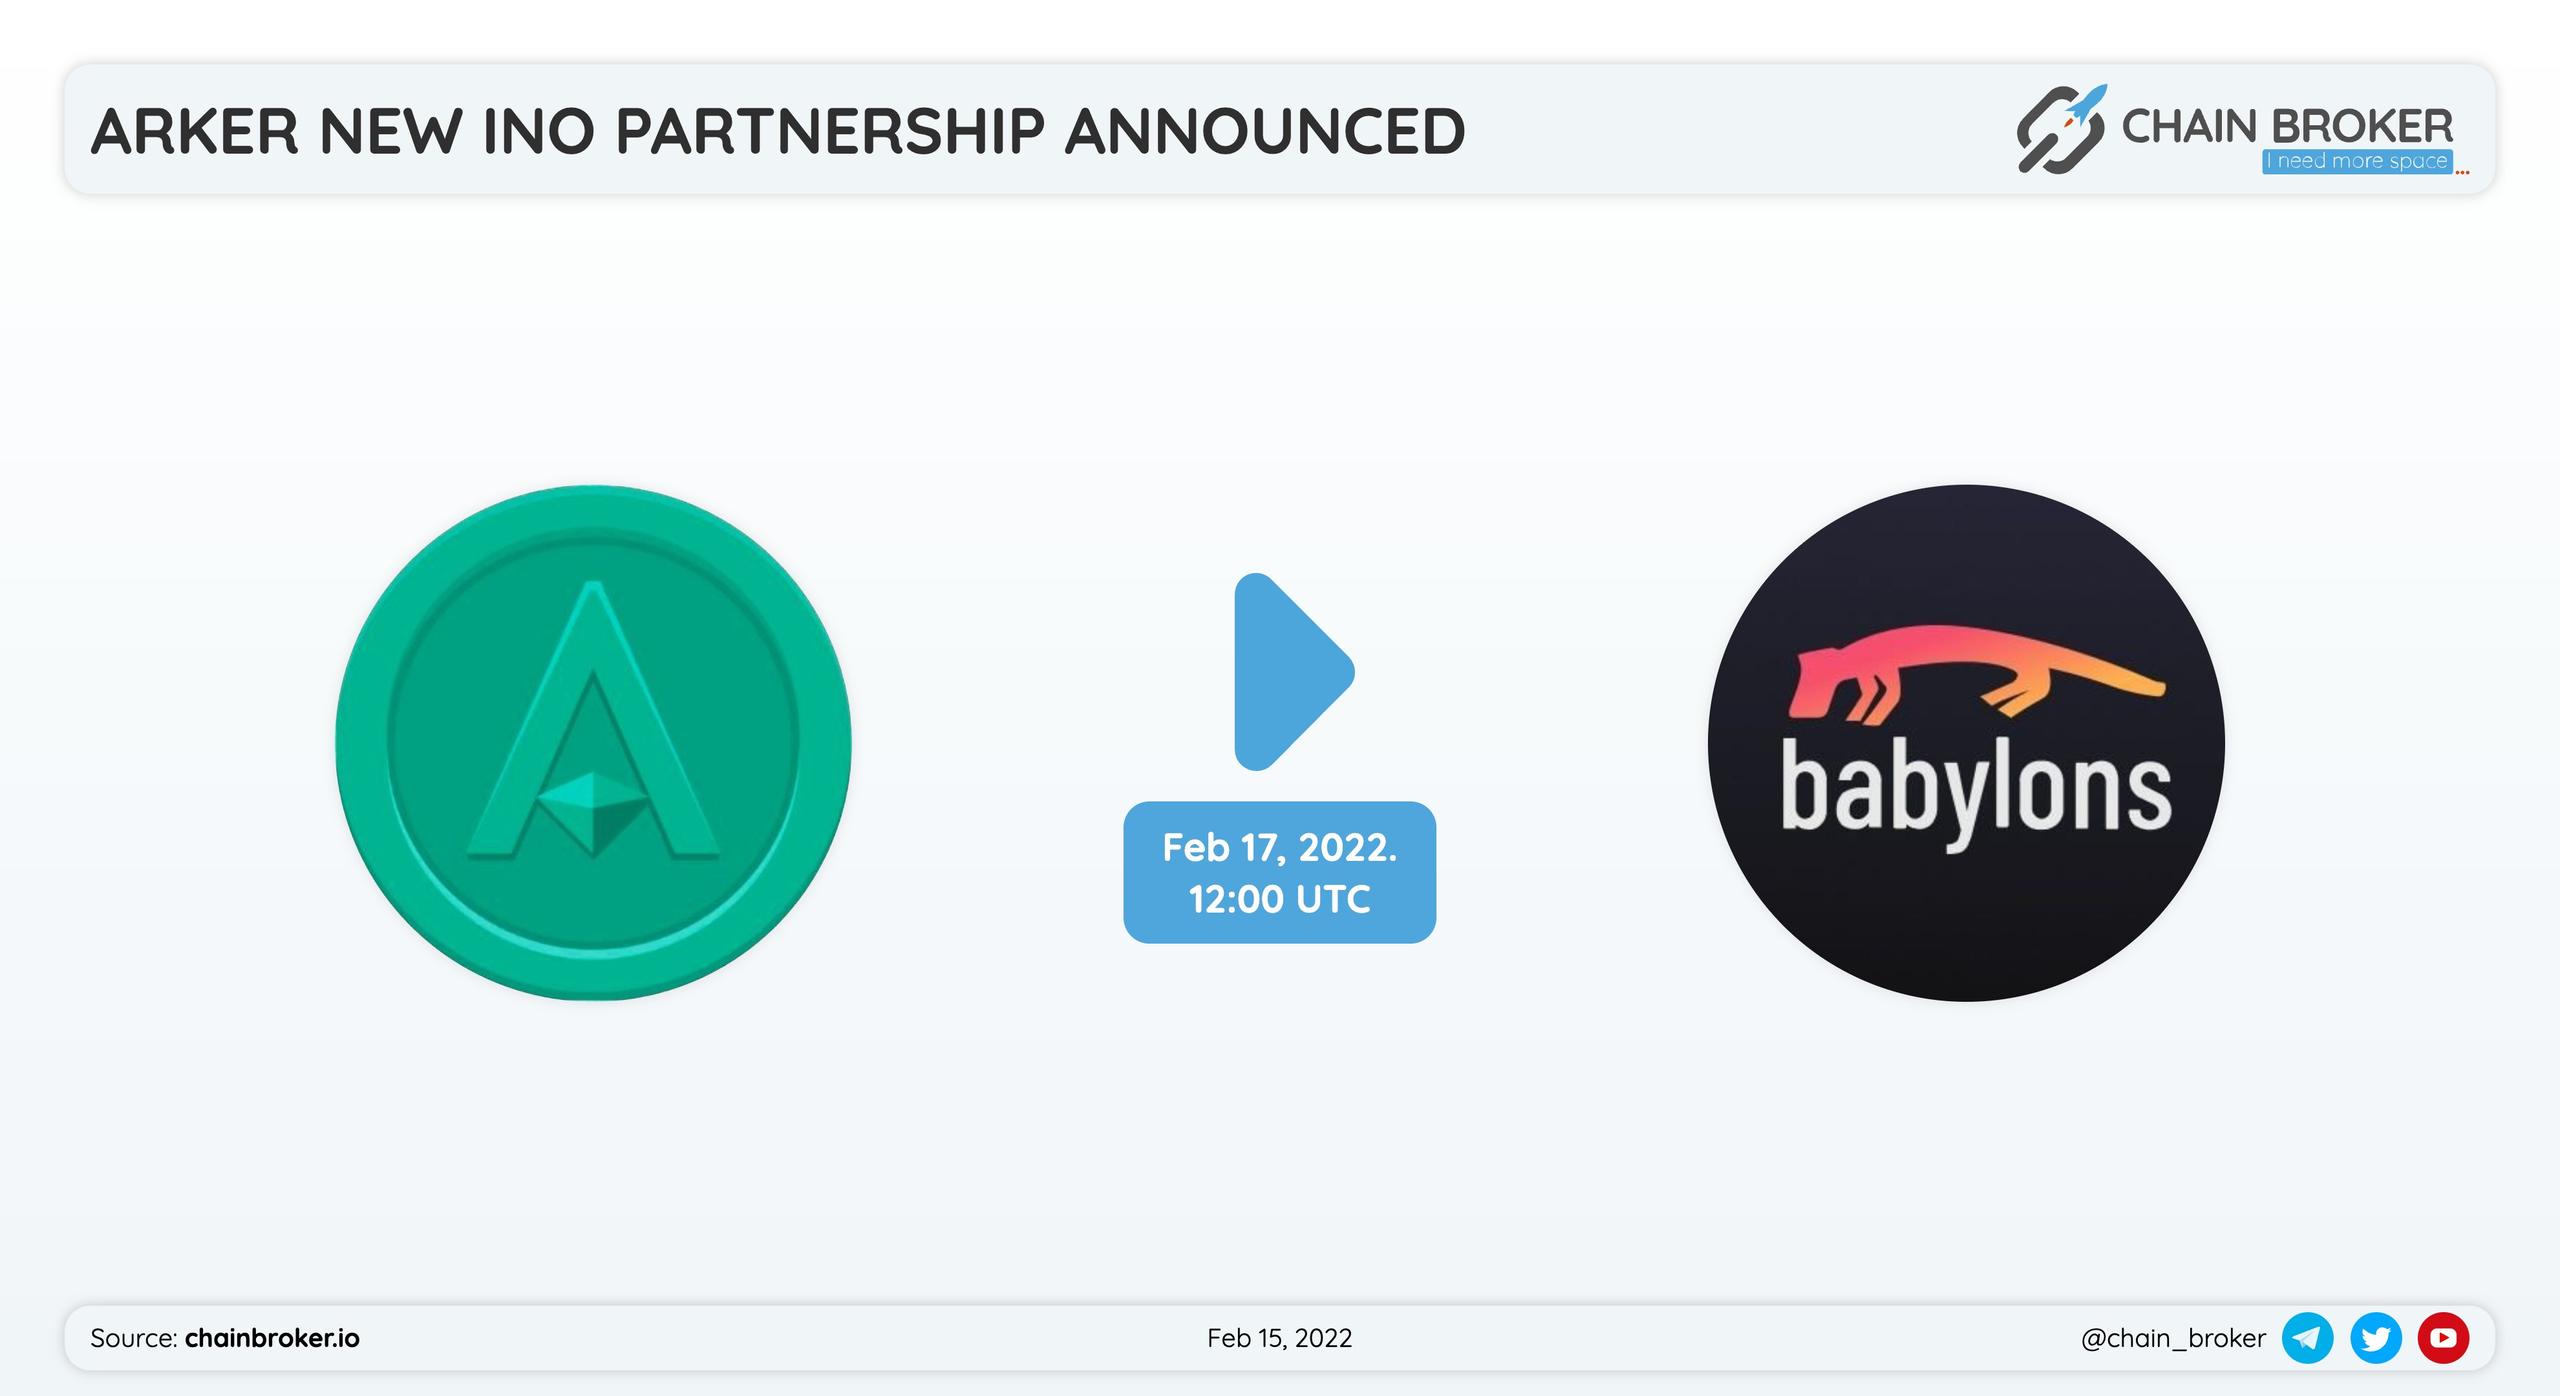 Arker Community has partnered with BabylonsNFT for an INO.